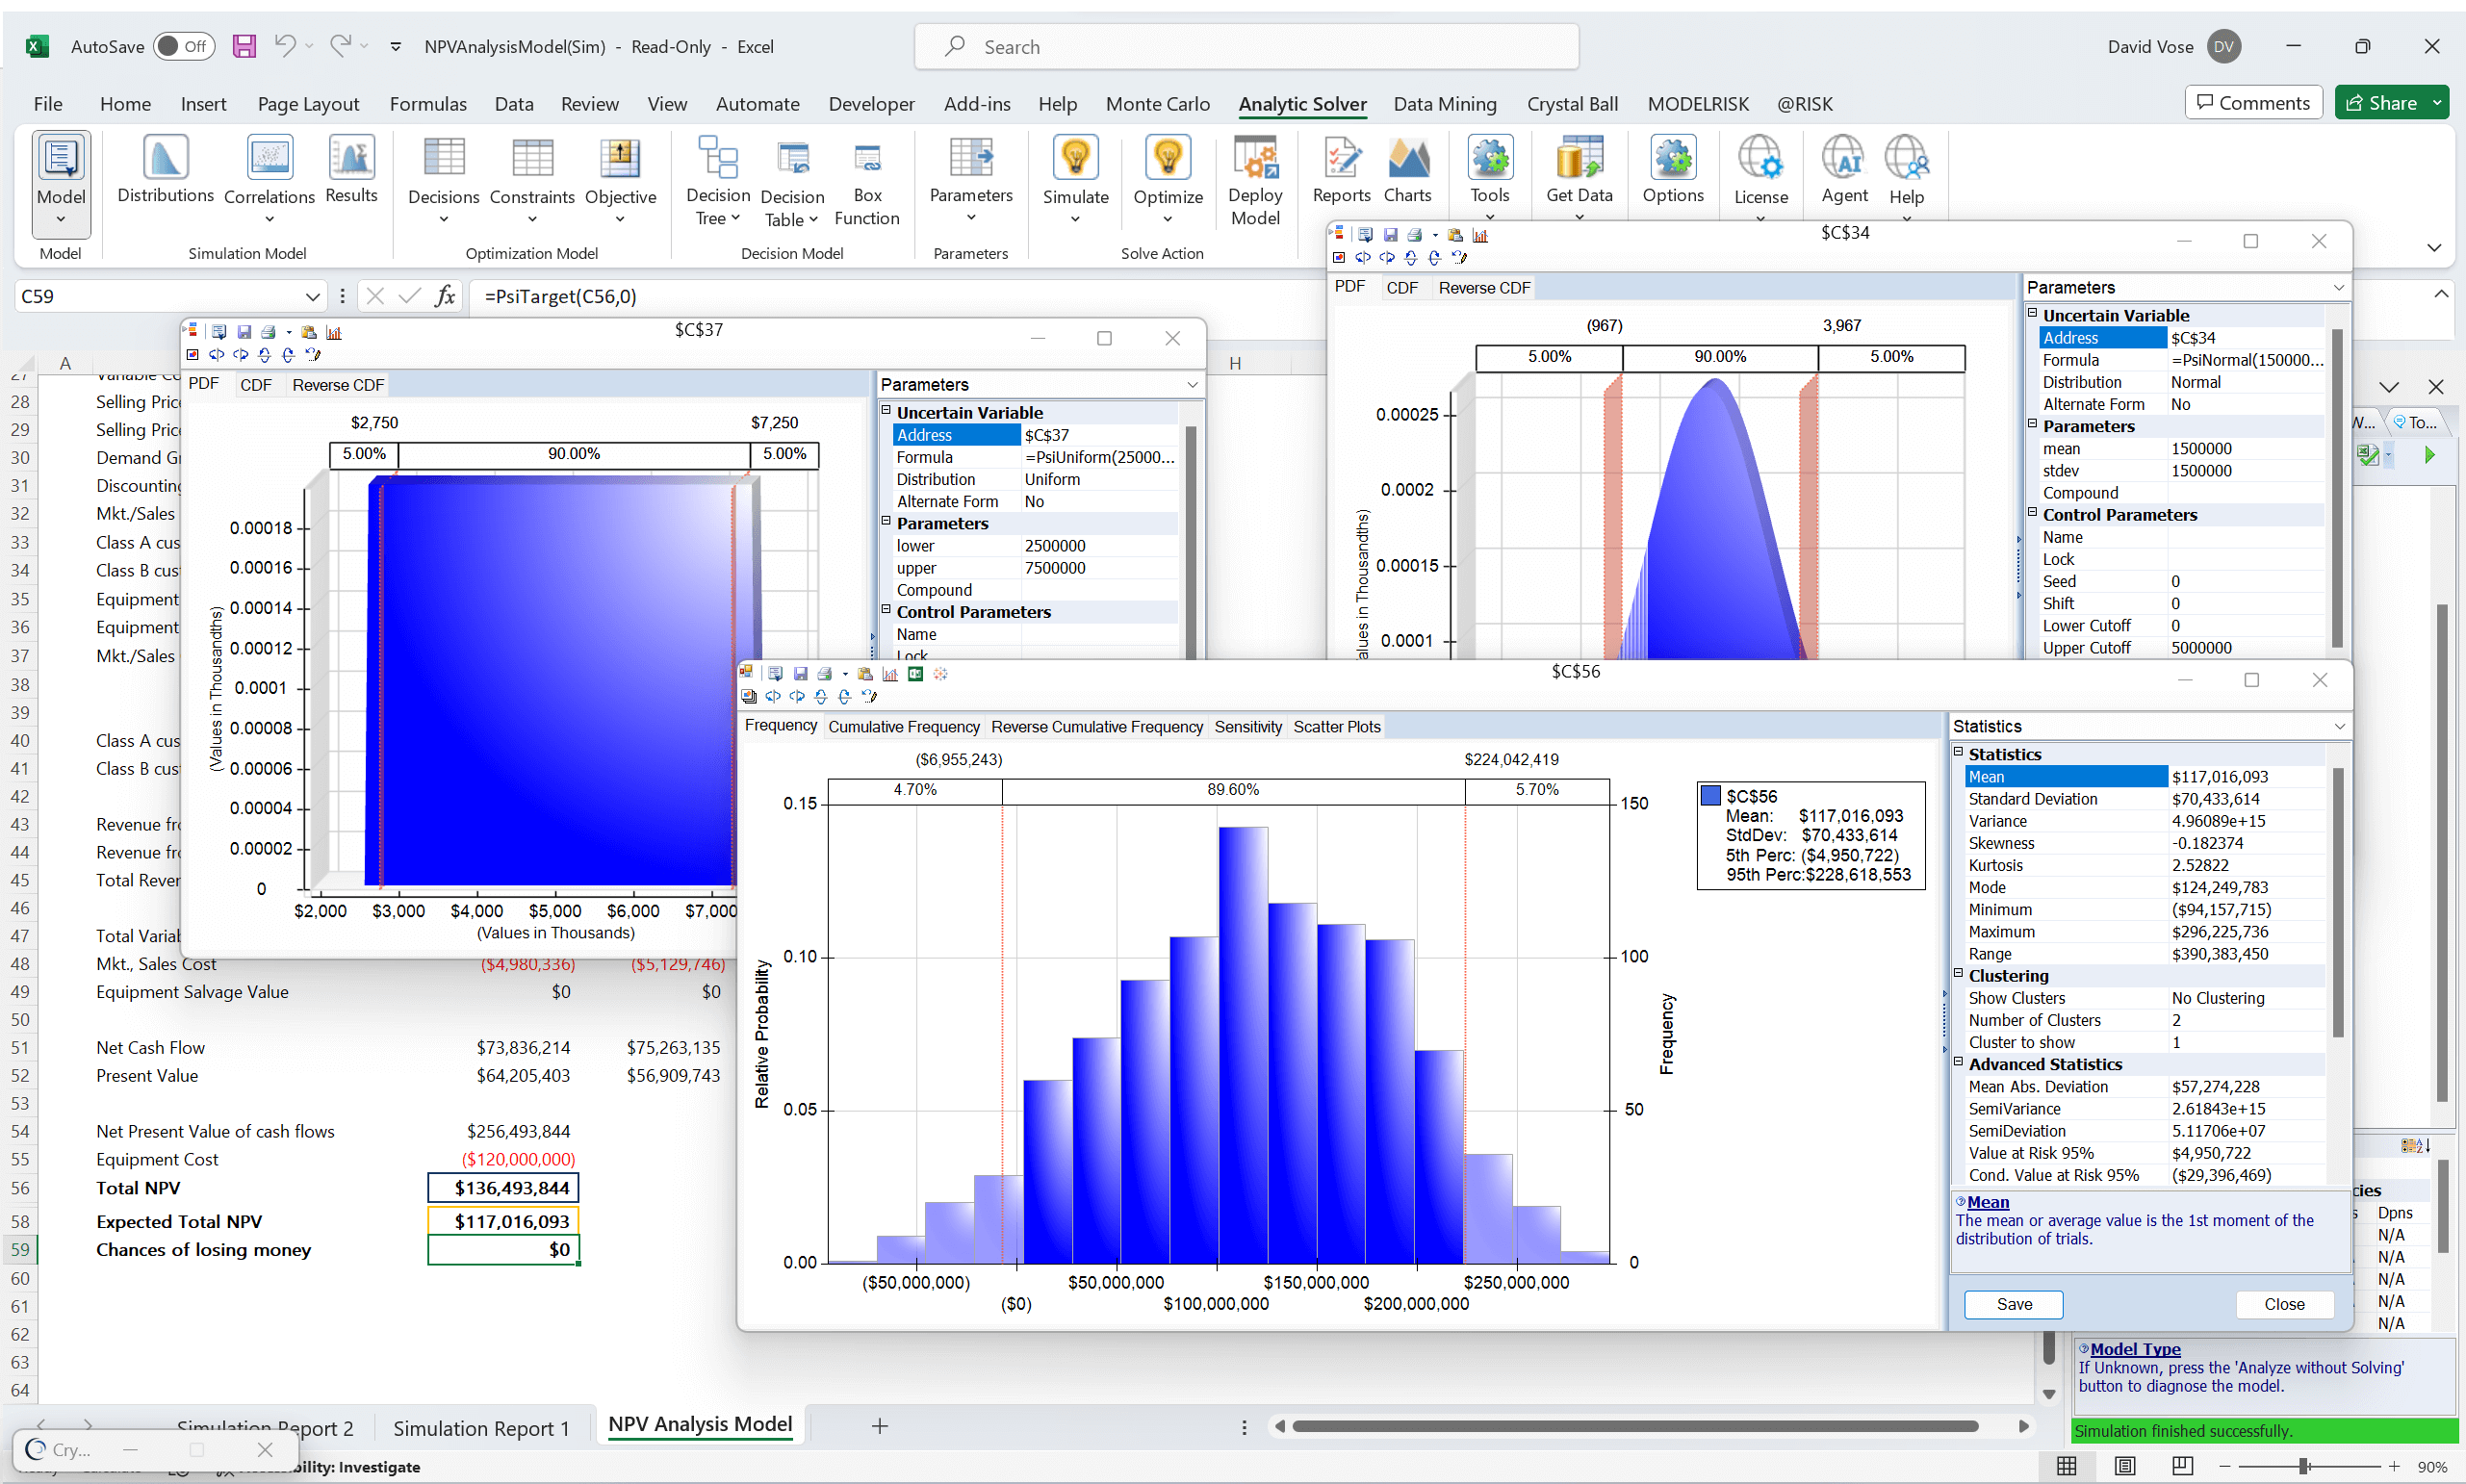 Analytic Solver results